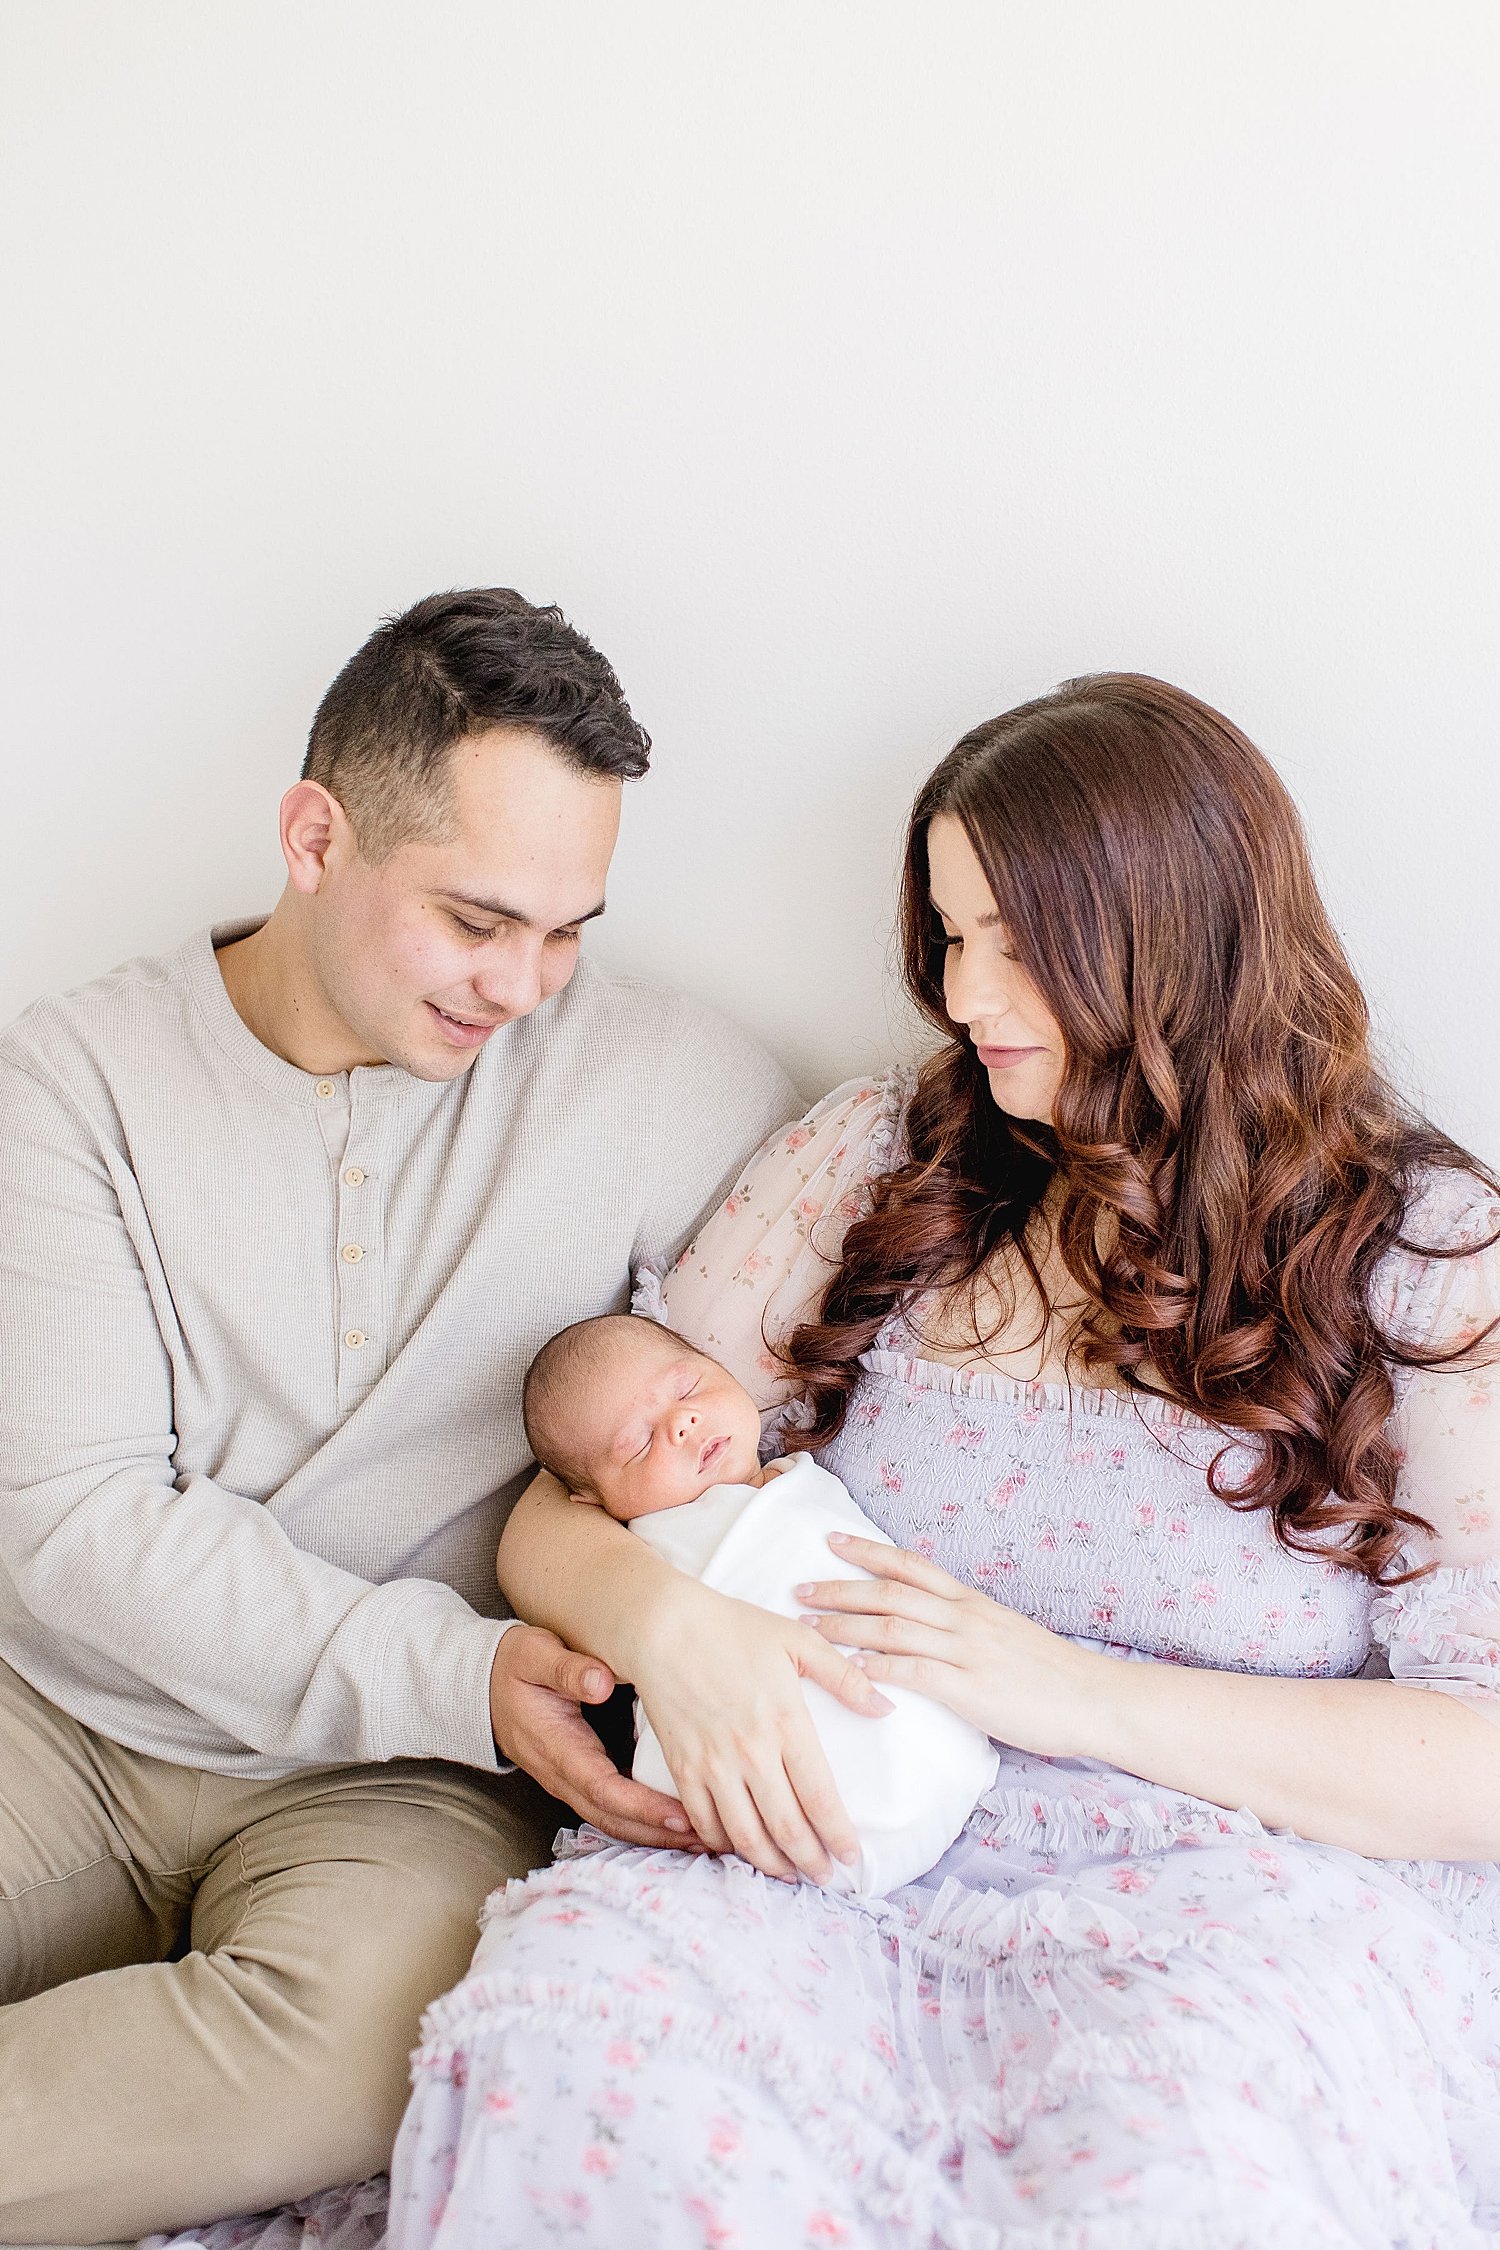 Mom and Dad with their precious newborn. Photo by Ambre Williams Photography.